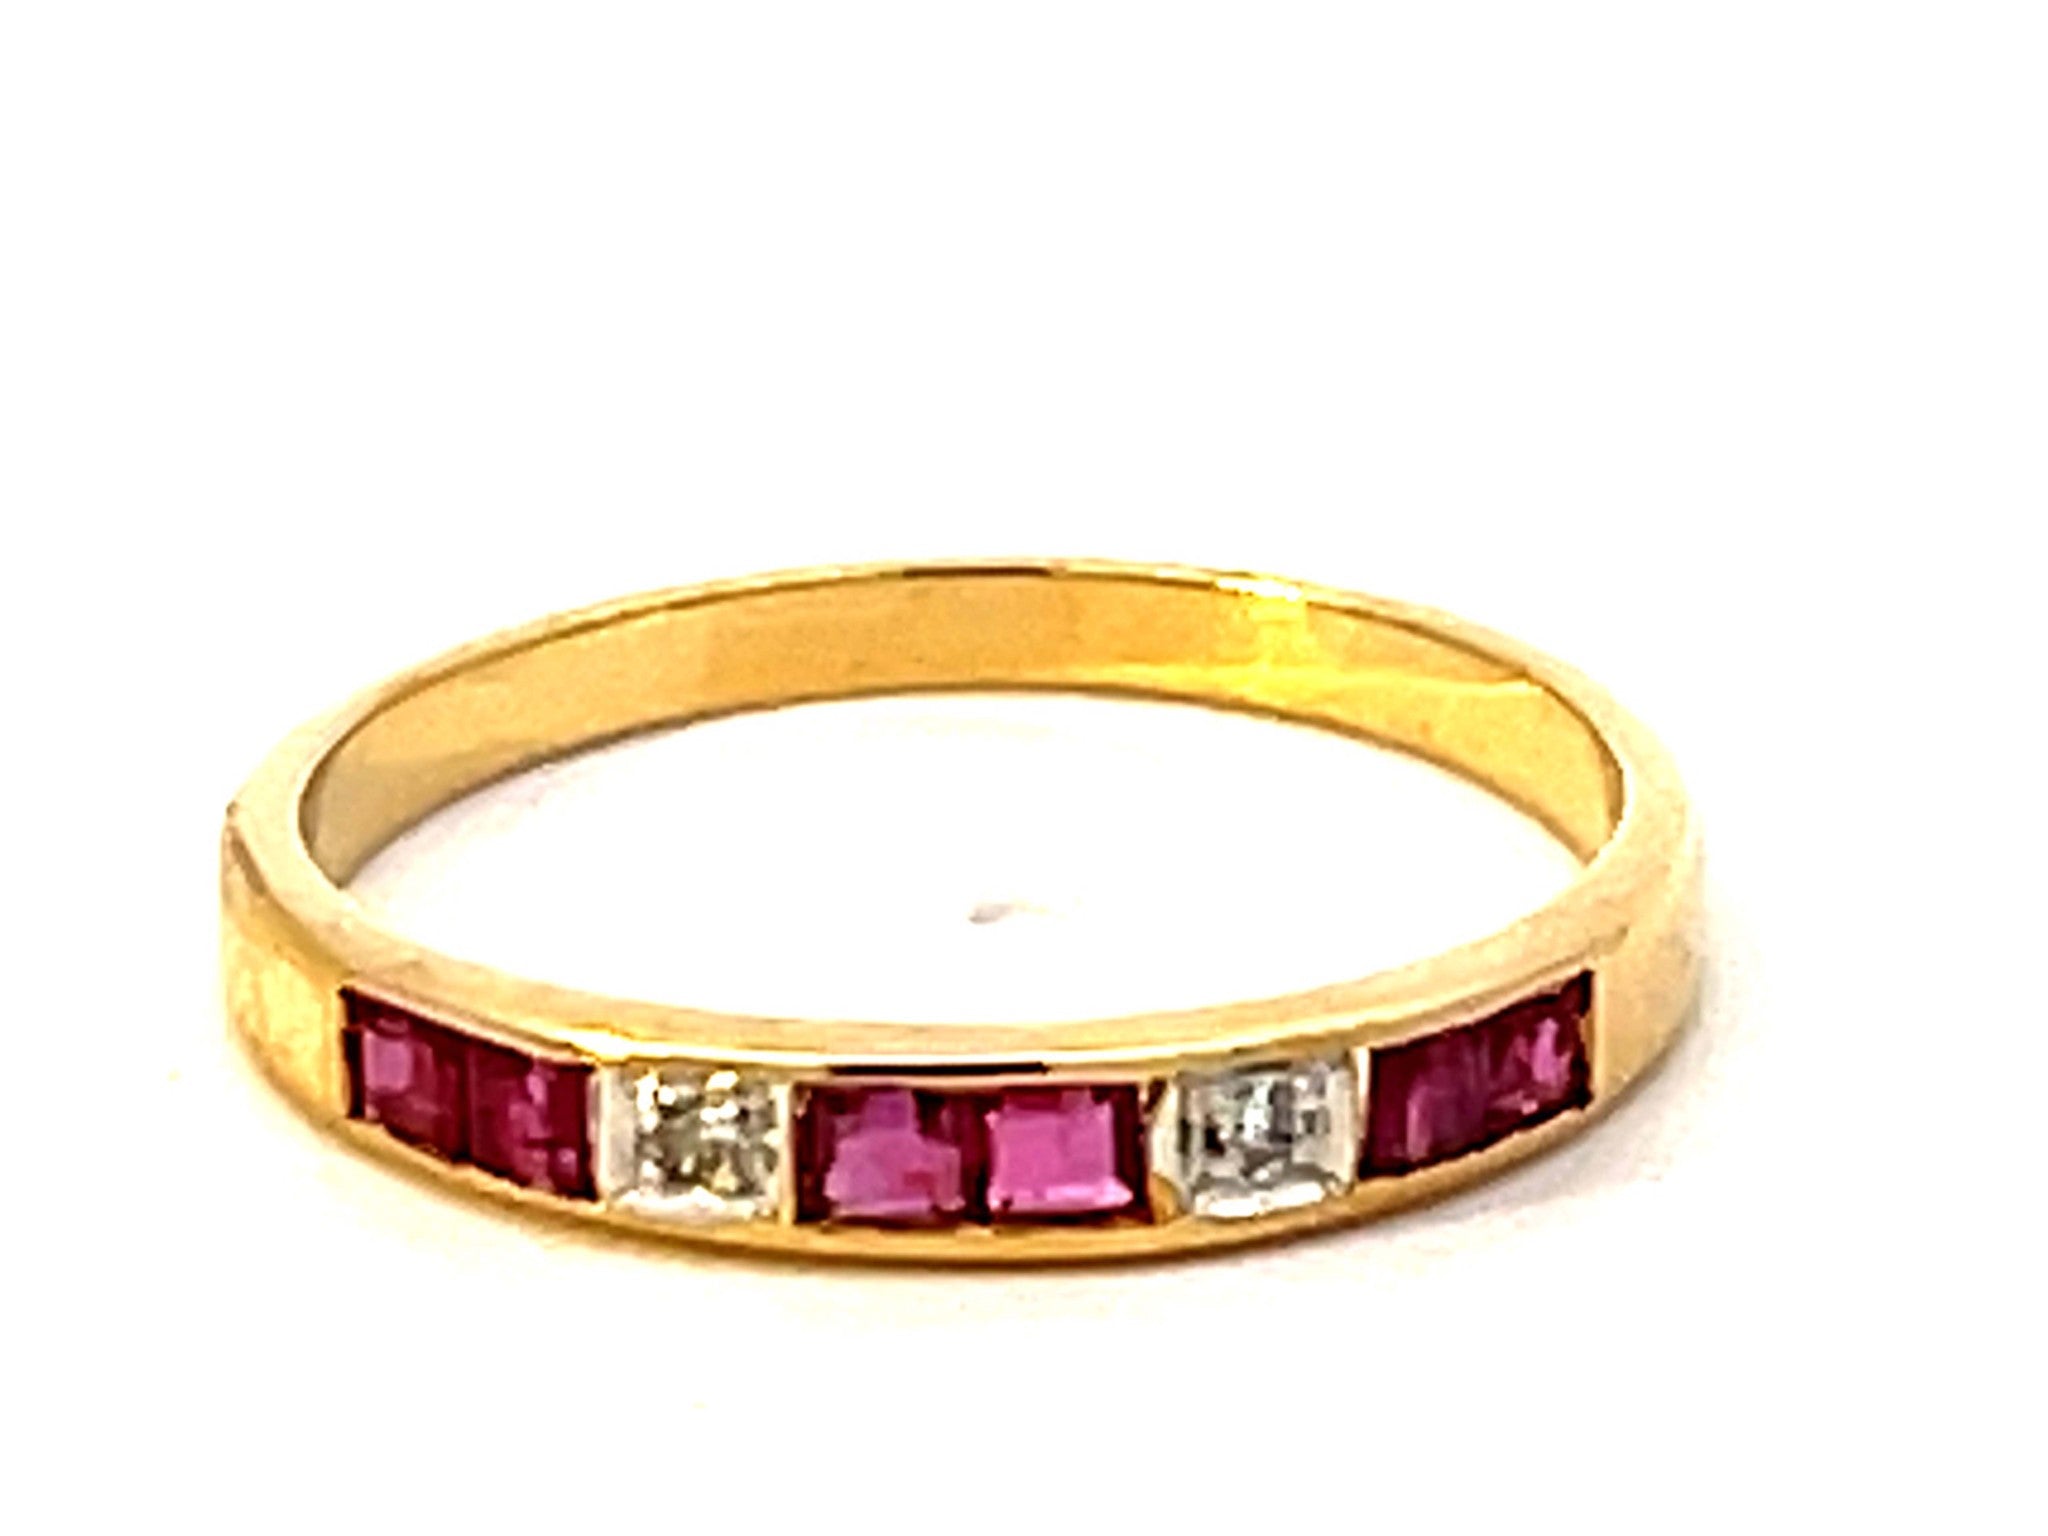 Channel Set Rubies and Diamond Band Ring in 14k Yellow Gold